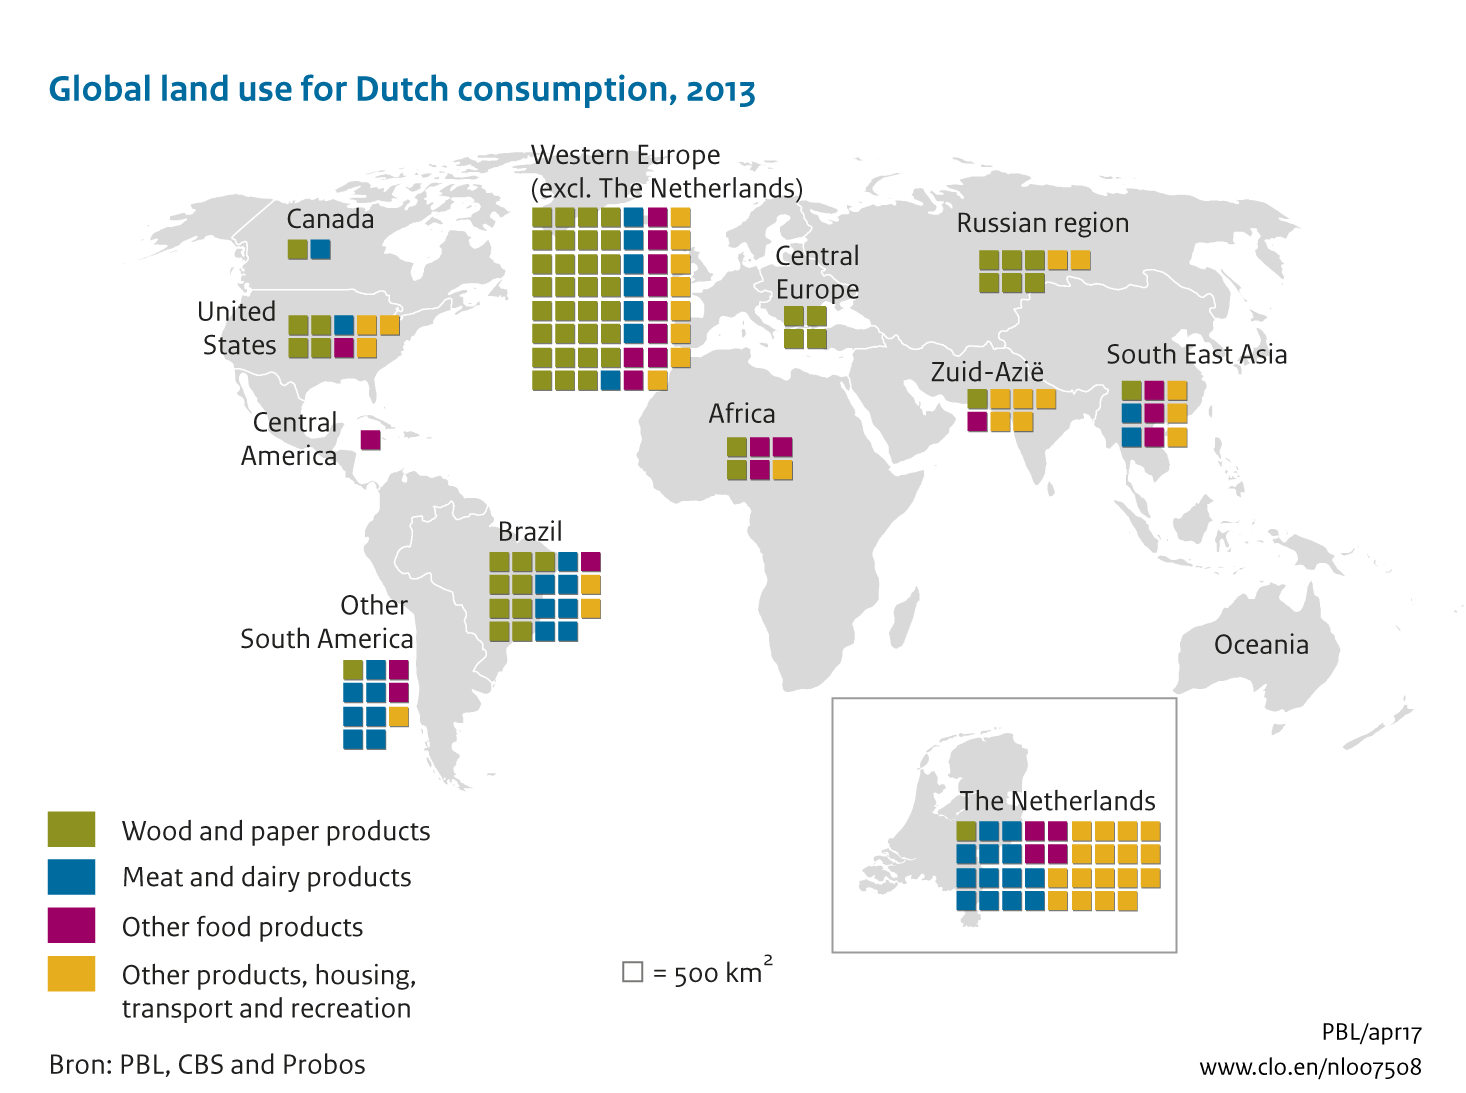 Image Global land use for Dutch consumption by world region, 2013 . The image is further explained in the text.